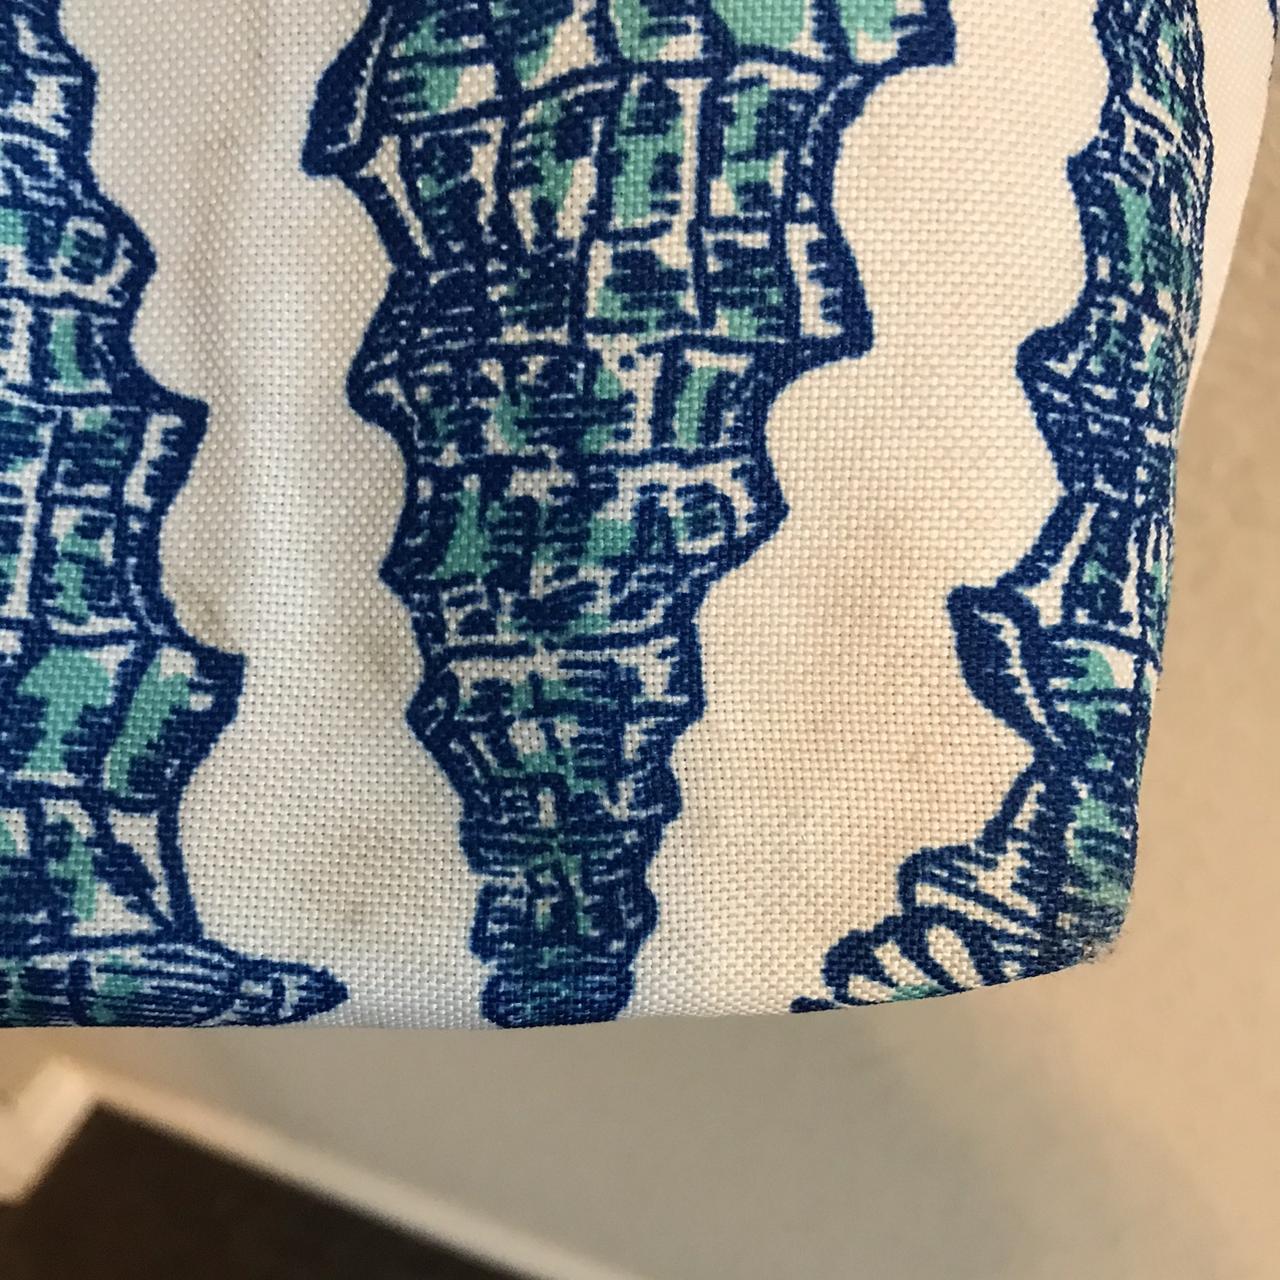 Lilly Pulitzer Women's Blue and White Bag (3)